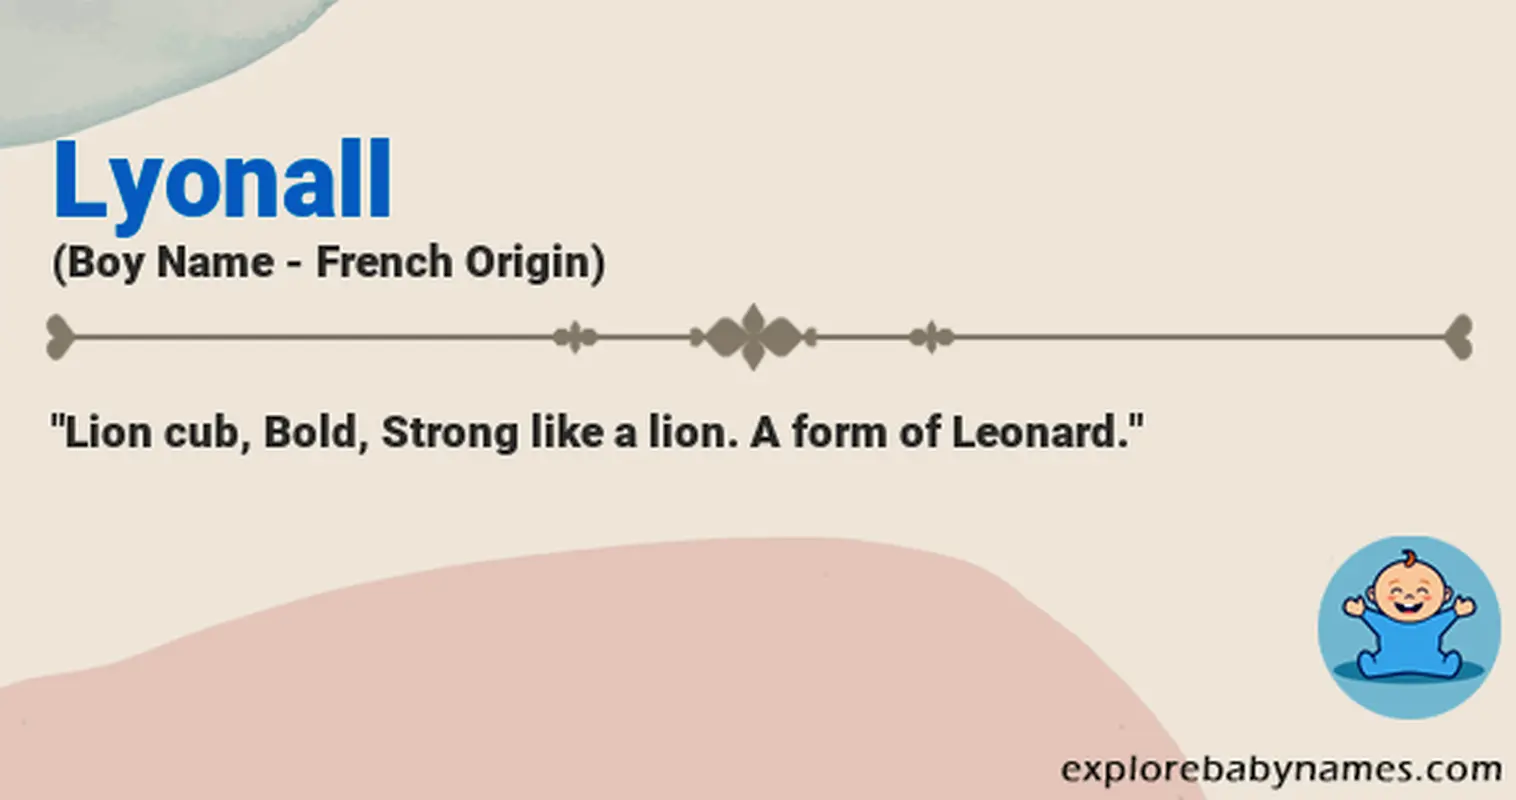 Meaning of Lyonall